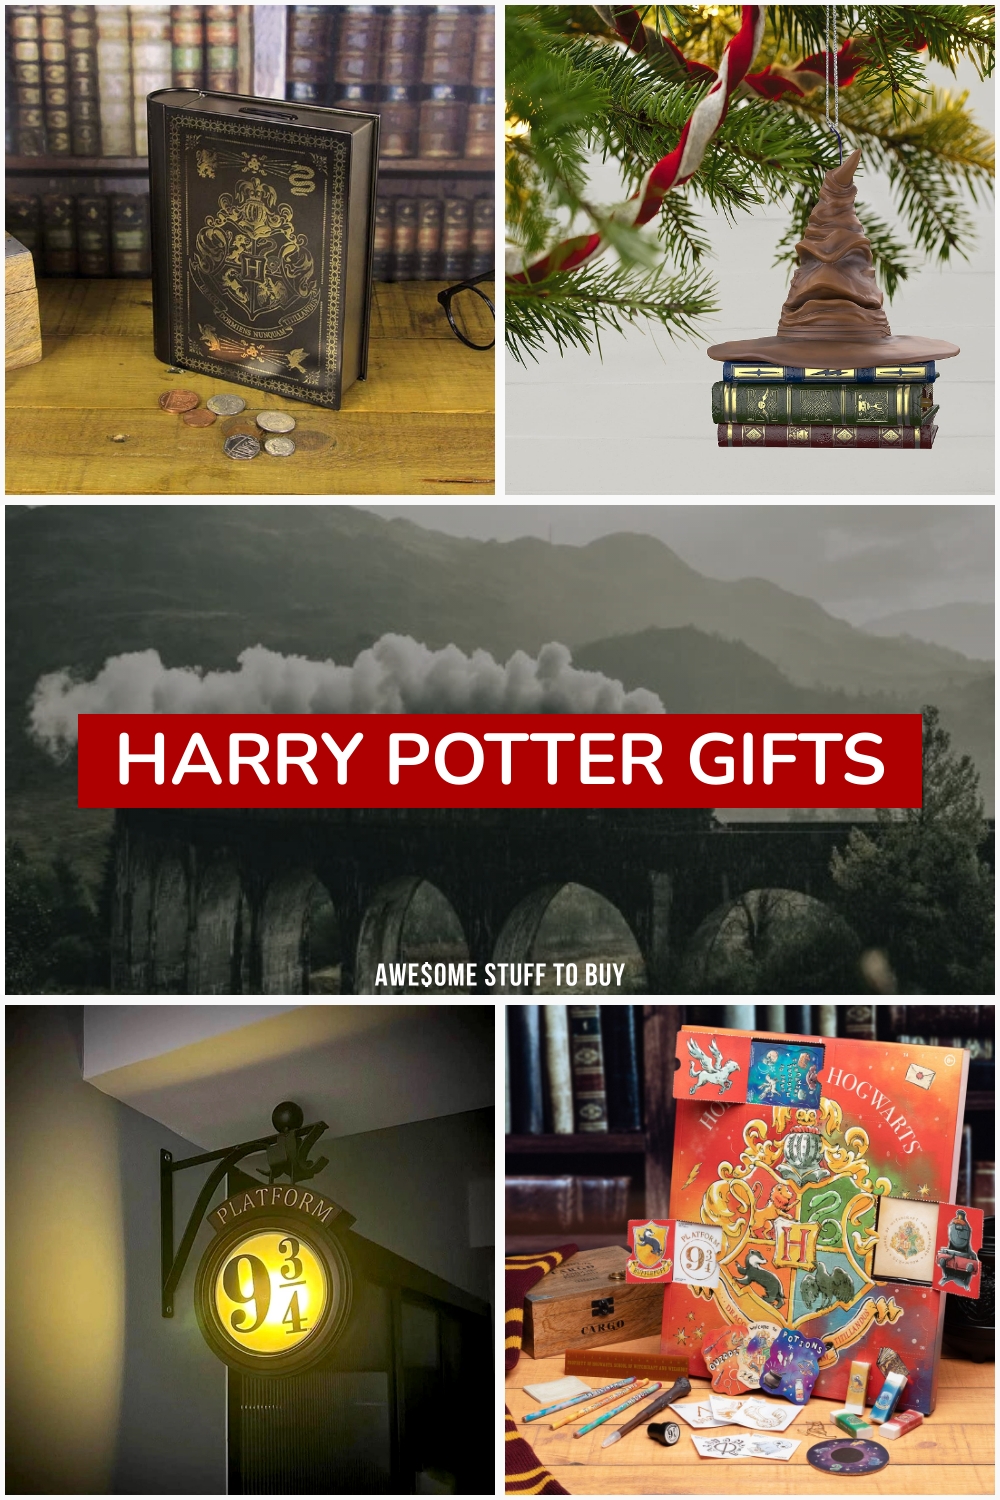 Harry Potter Gifts // Awesome Stuff to Buy